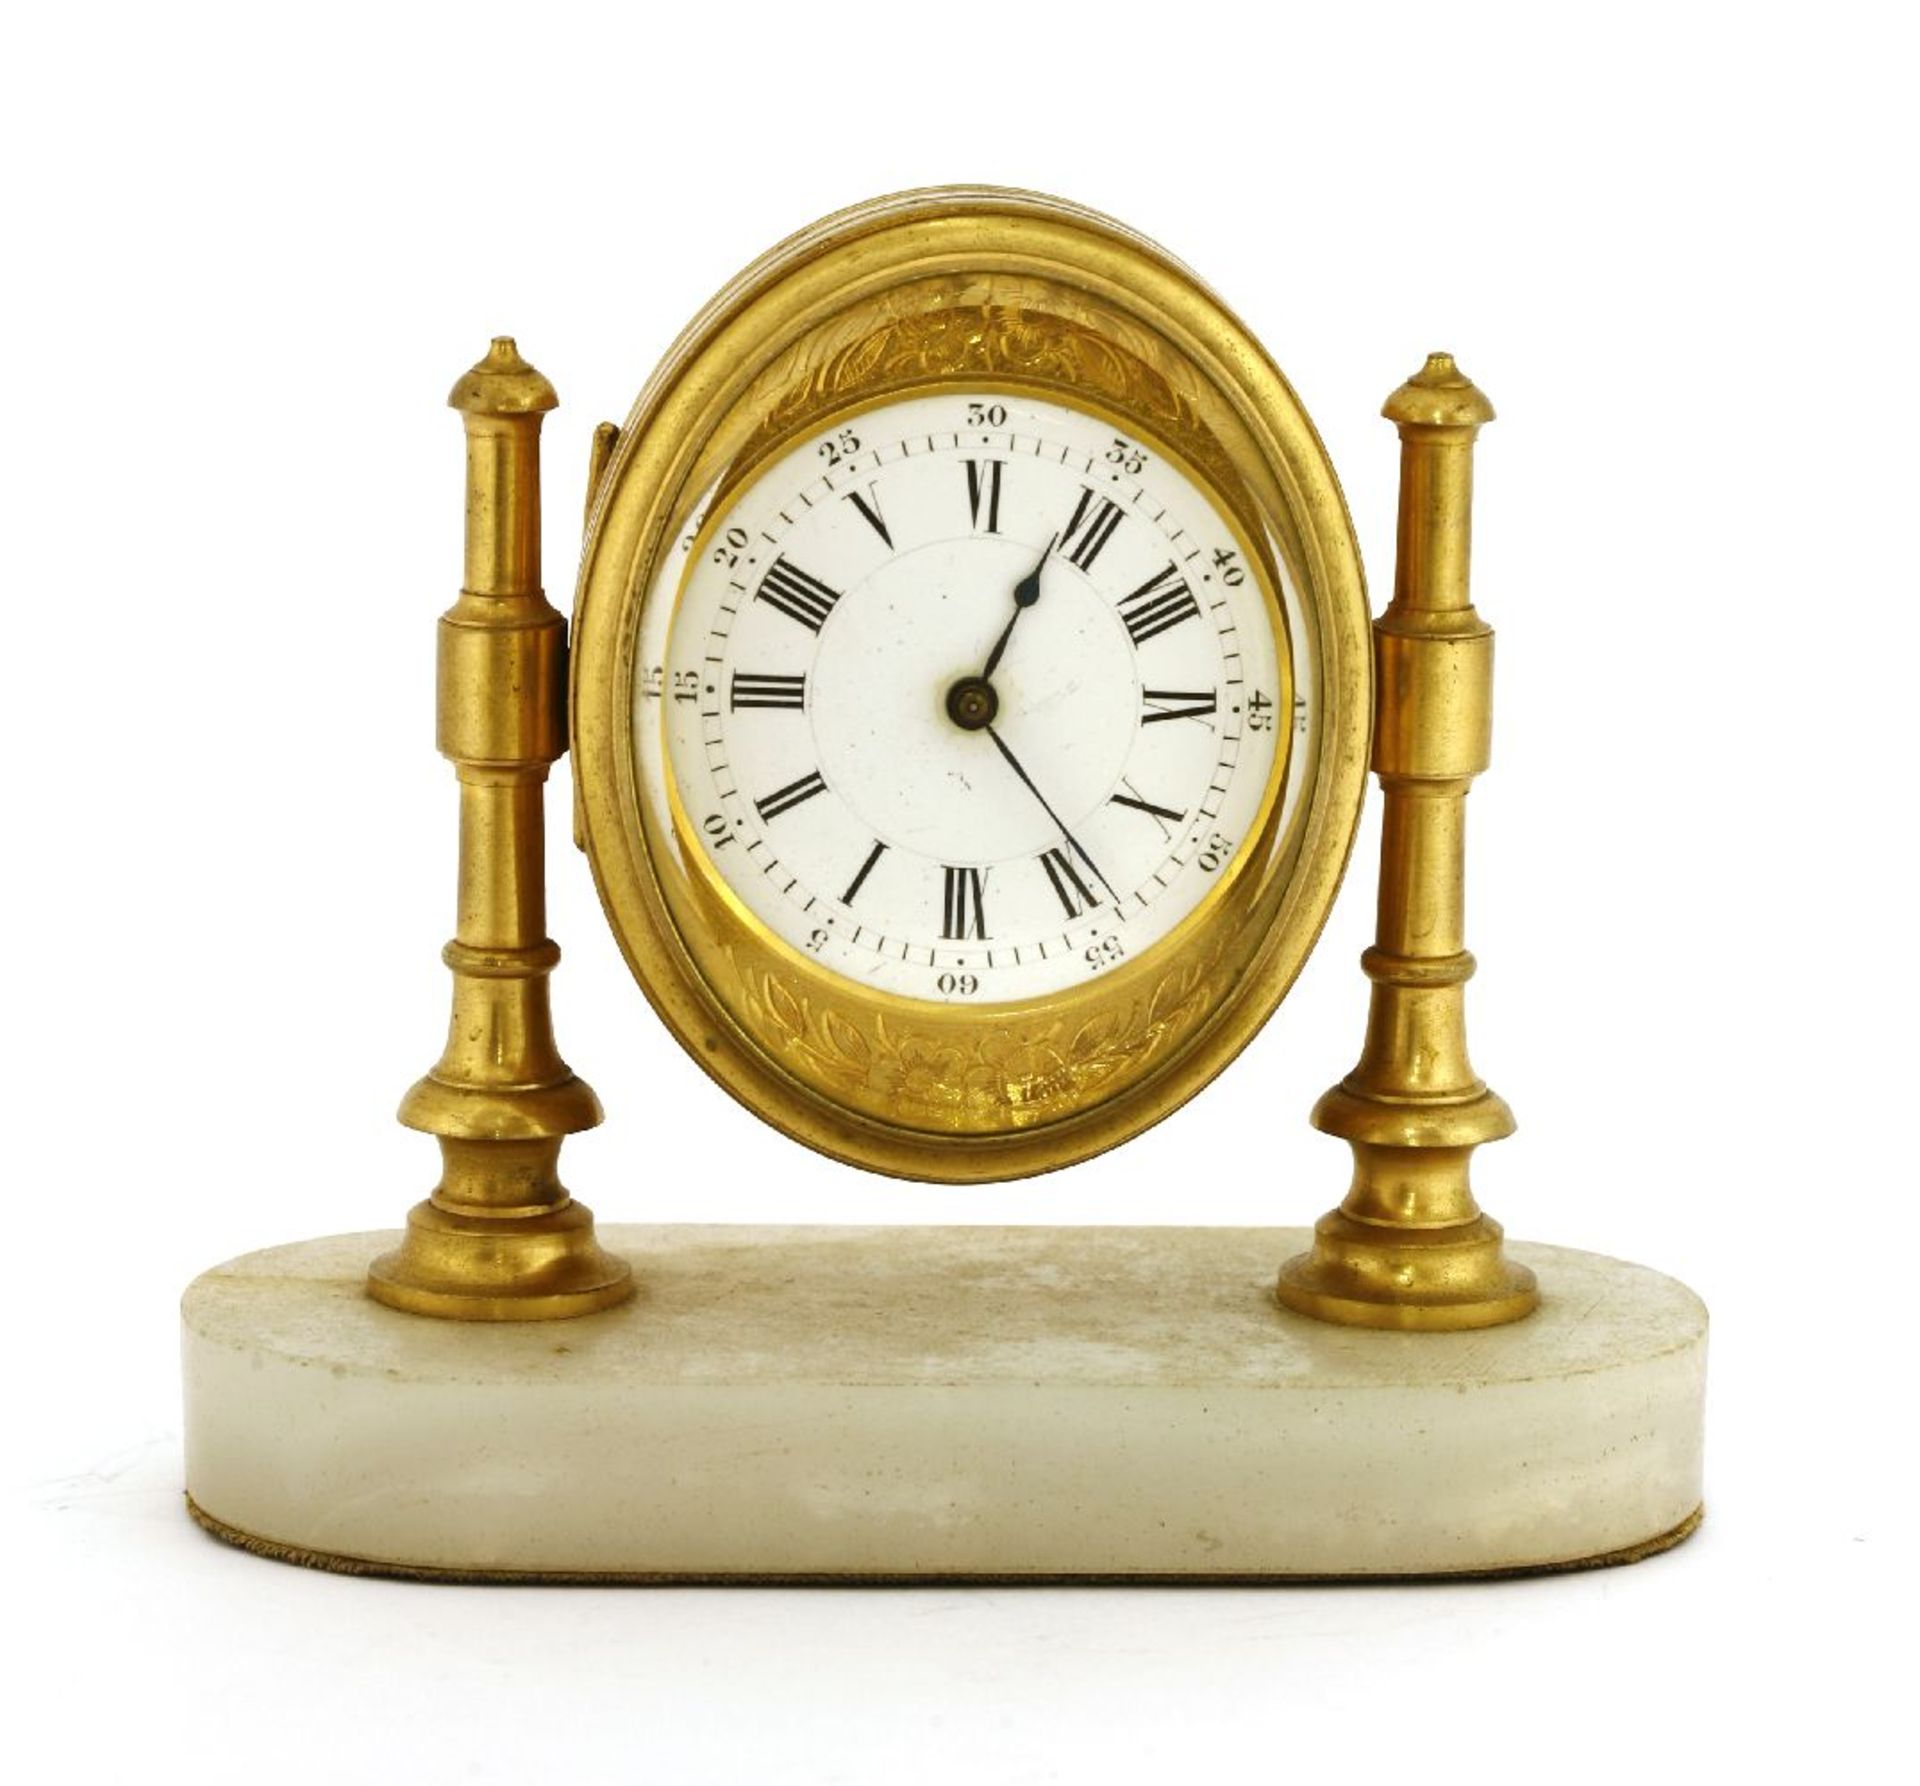 A French gilt bronze mantel timepiece,late 19th century, the oval case housing a circular enamel